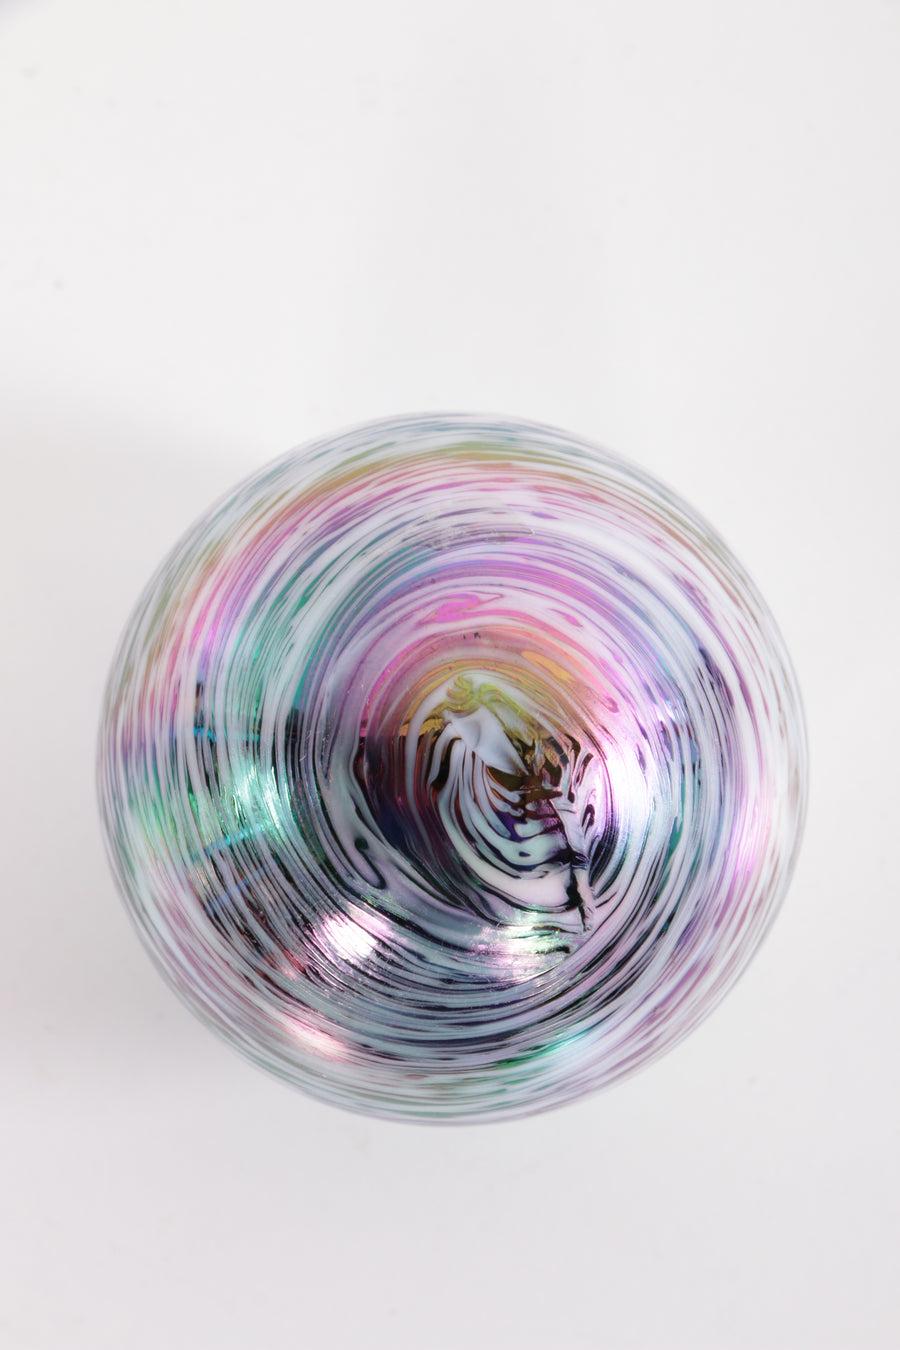 Paperweight of Beautifully Crafted Glass Colored Gray Purple

Additional information: 
Dimensions: 6 W x 6 D x 5.5 H cm 
Period of Time: 1960
Condition: Good
